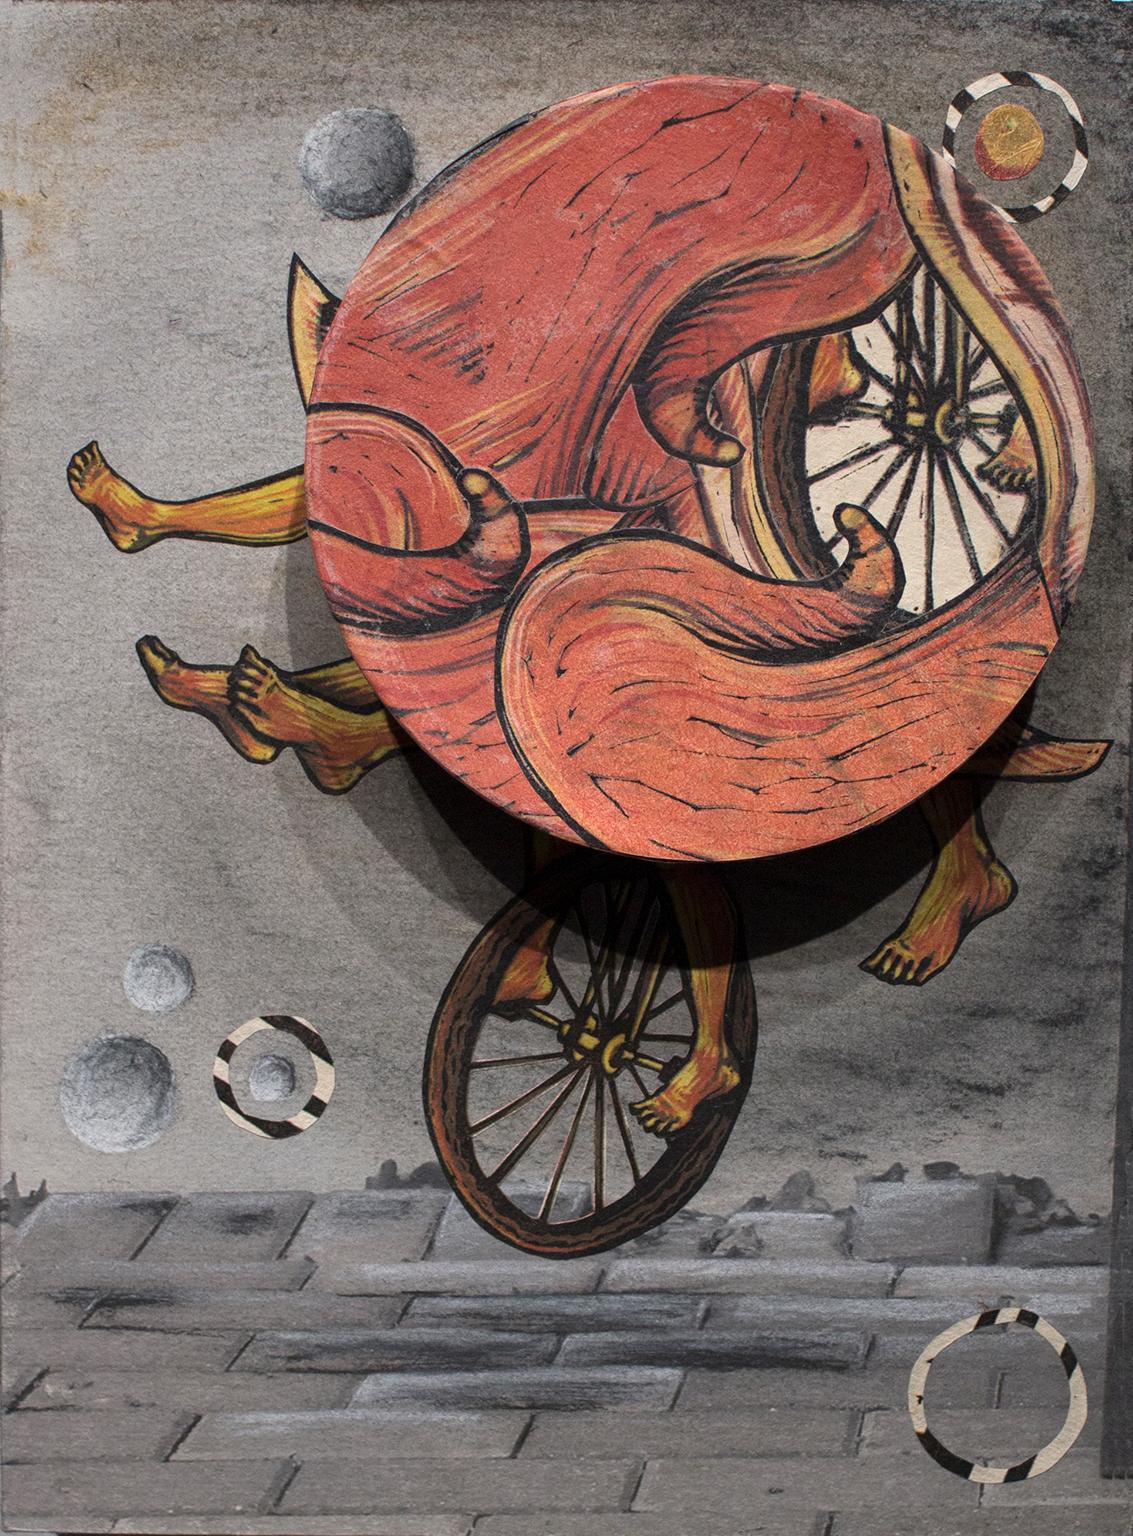 Try Not to Fall, Just Go II. Surrealism with a spinning wheel by Courtney Googe – Print von Courtney Nicole Googe